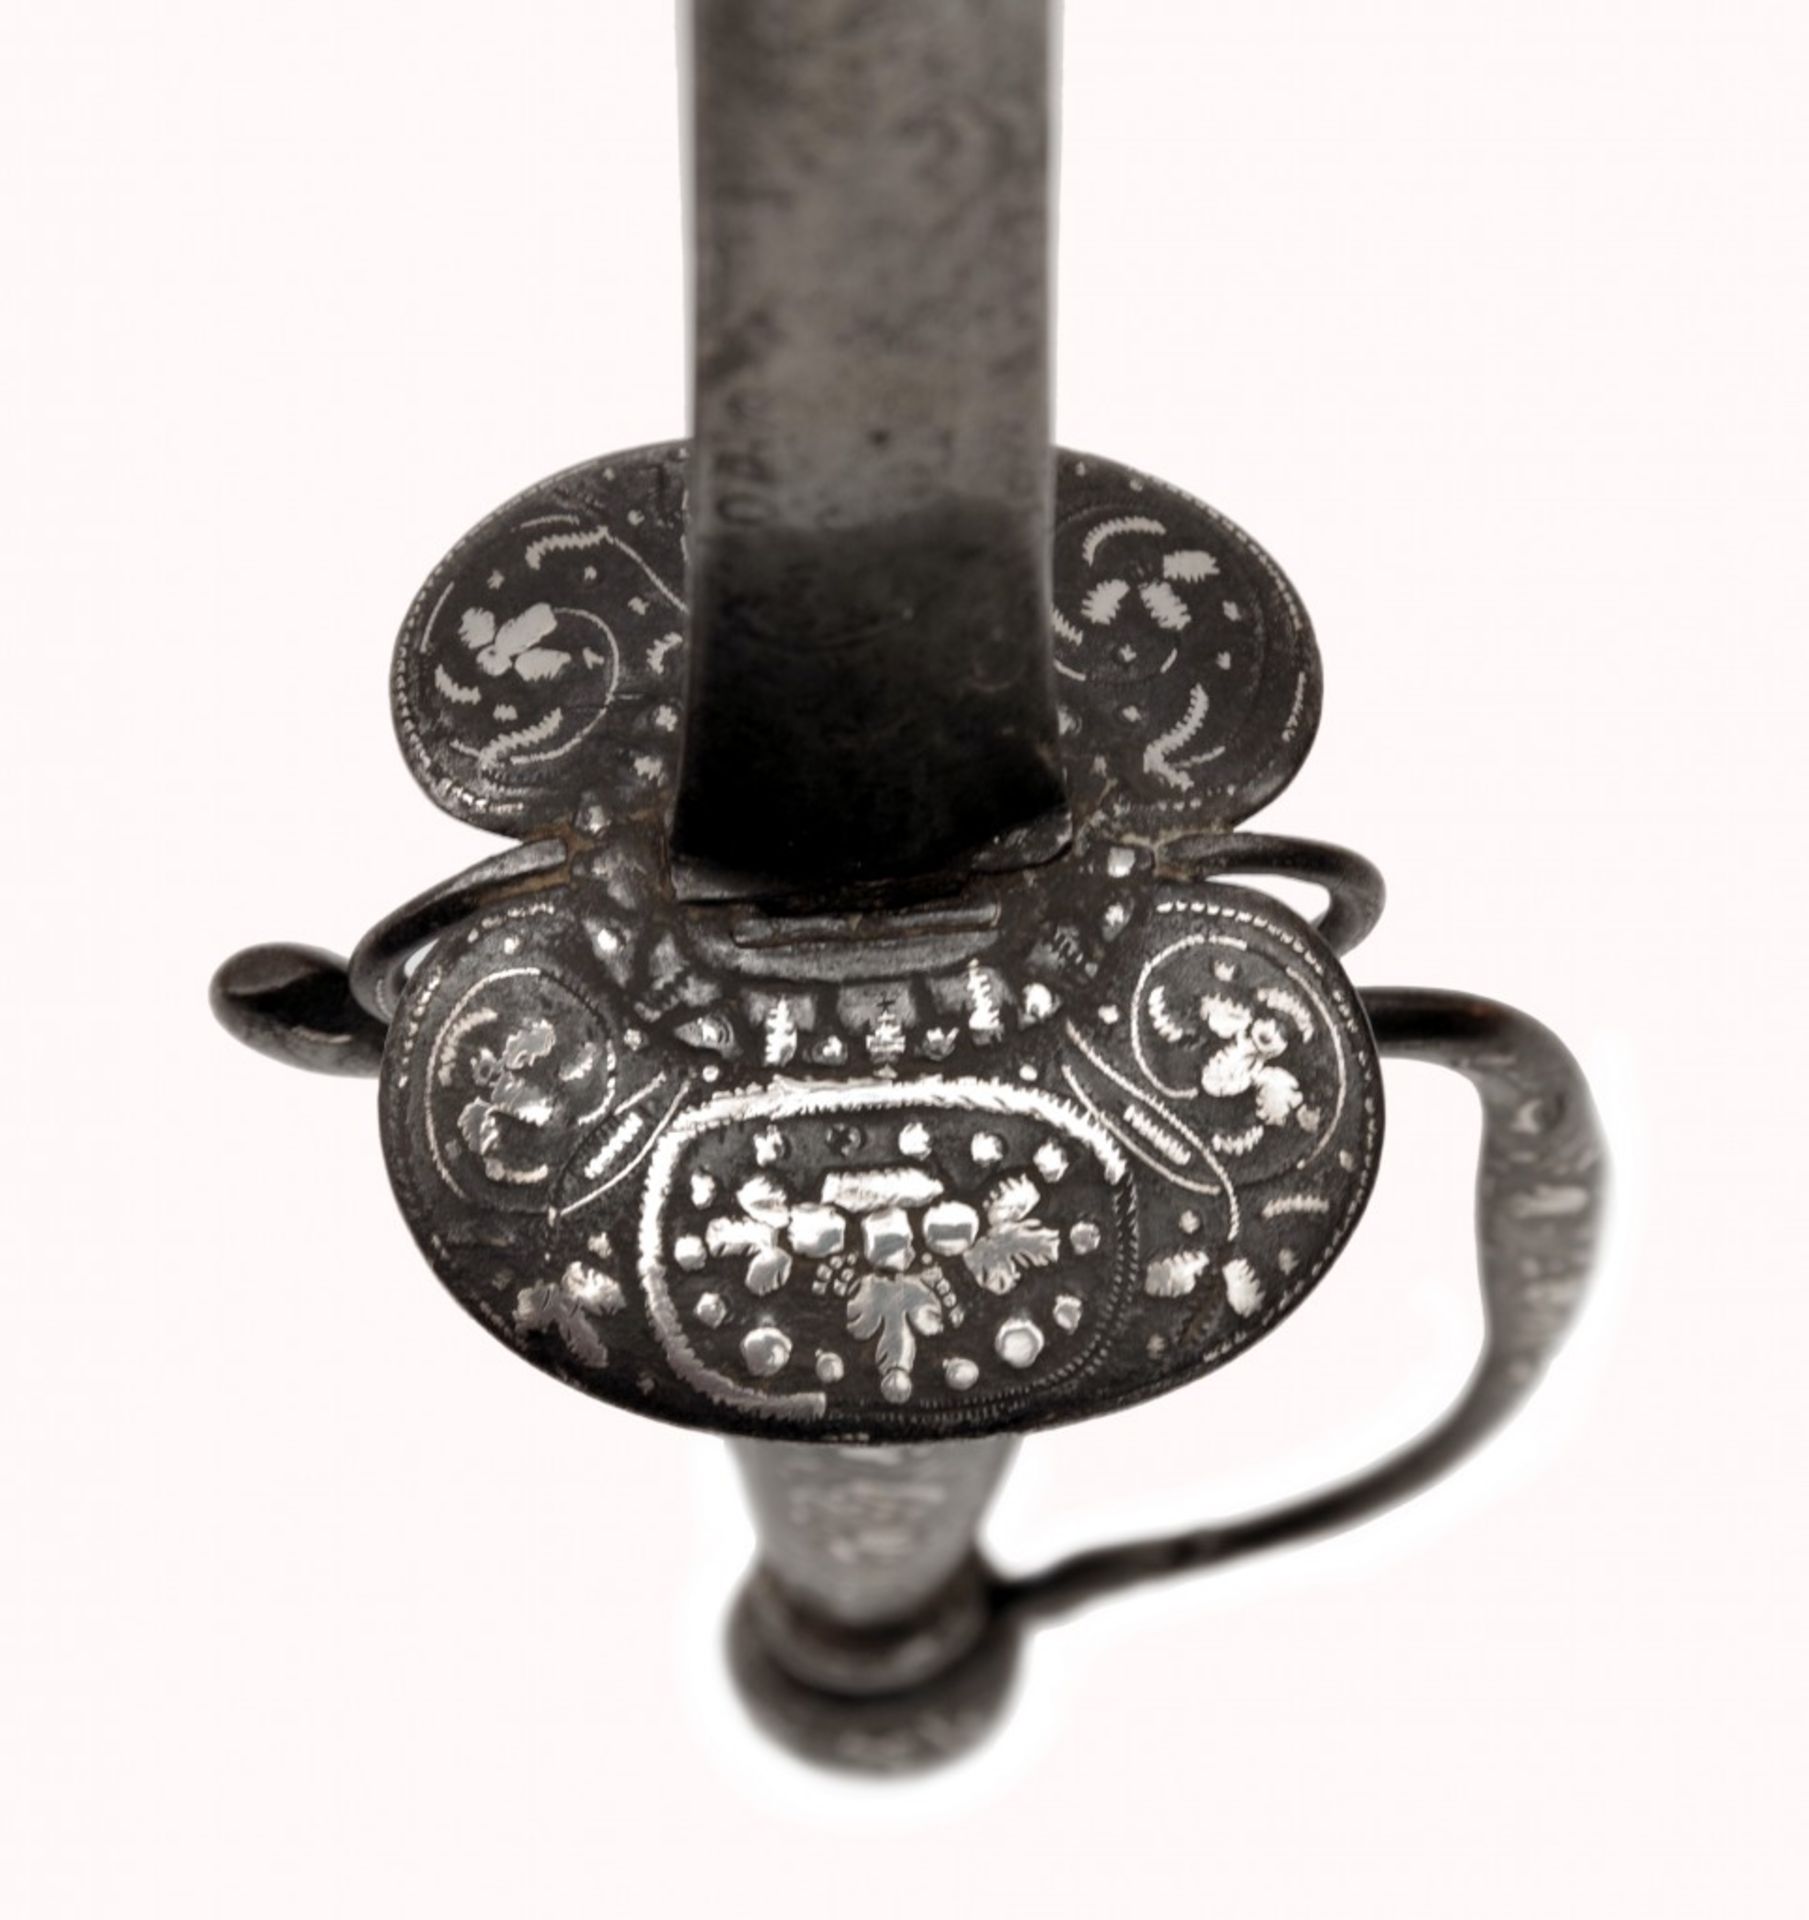 A Small-sword with Silver-inlaid Hilt - Image 4 of 7